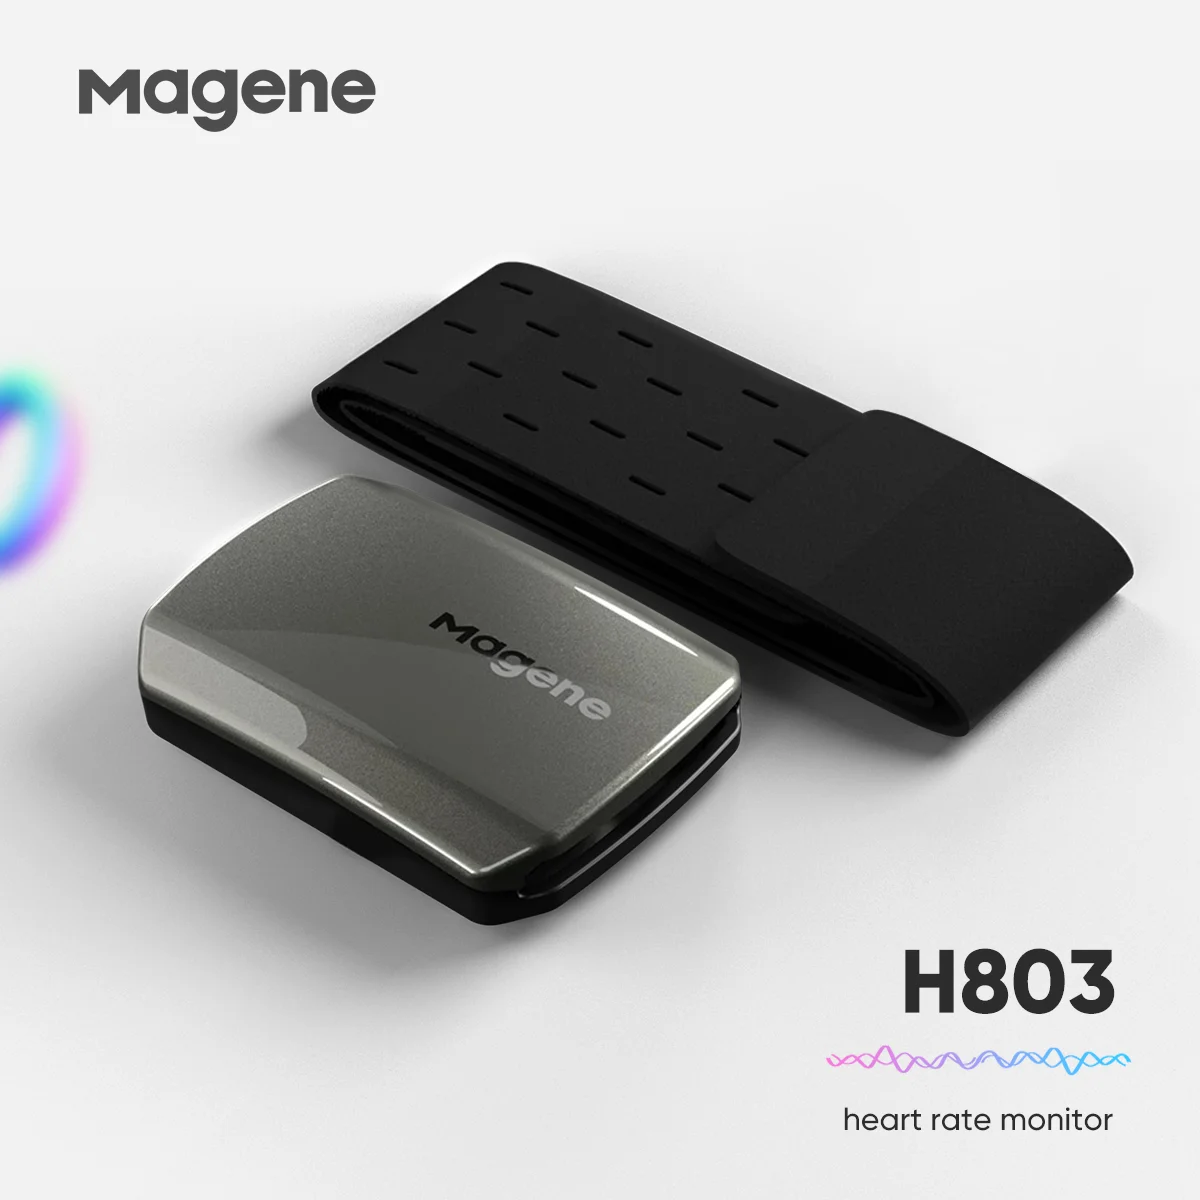 

Magene H803 Arm Heart Rate Sensor Dual Mode ANT+ & Bluetooth Compatible With Bicycle Computer Wahoo Garmin Bryton